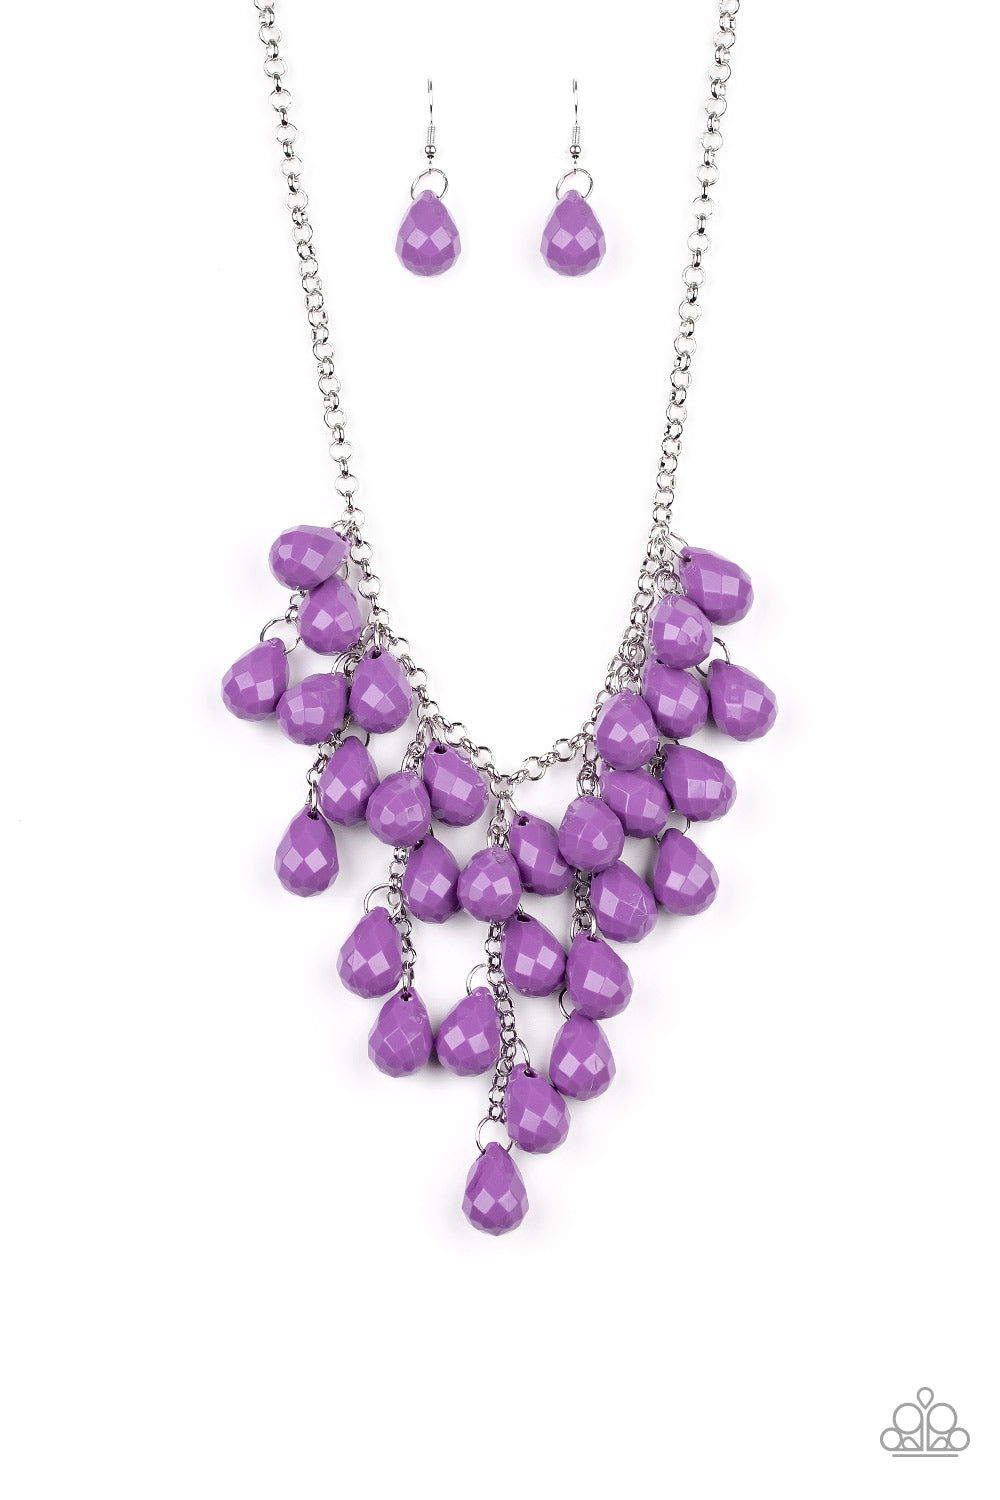 Paparazzi Accessories Serenely Scattered - Purple Necklaces - Lady T Accessories